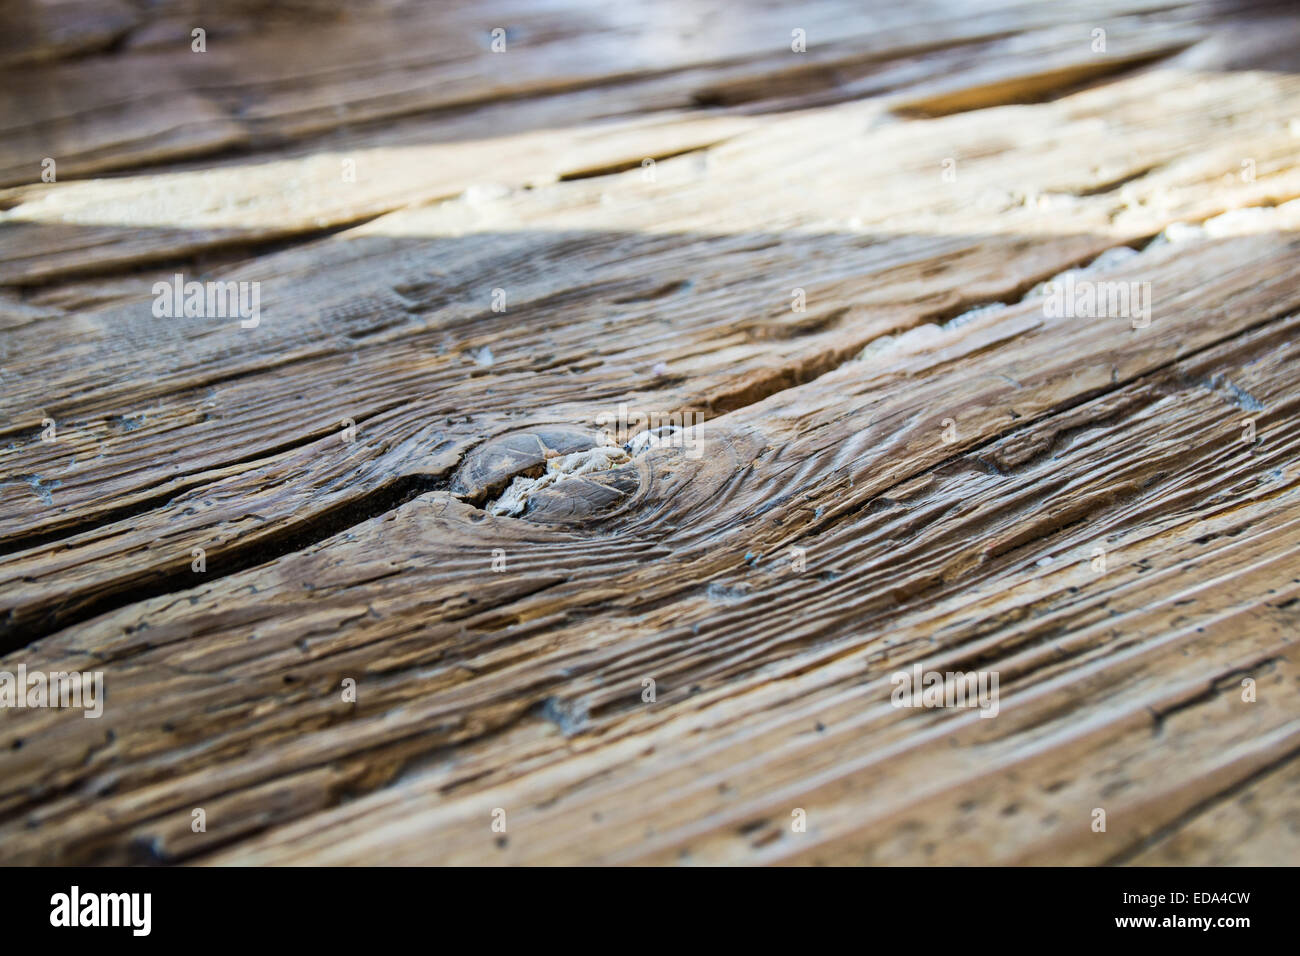 raw board with knot in the wood Stock Photo